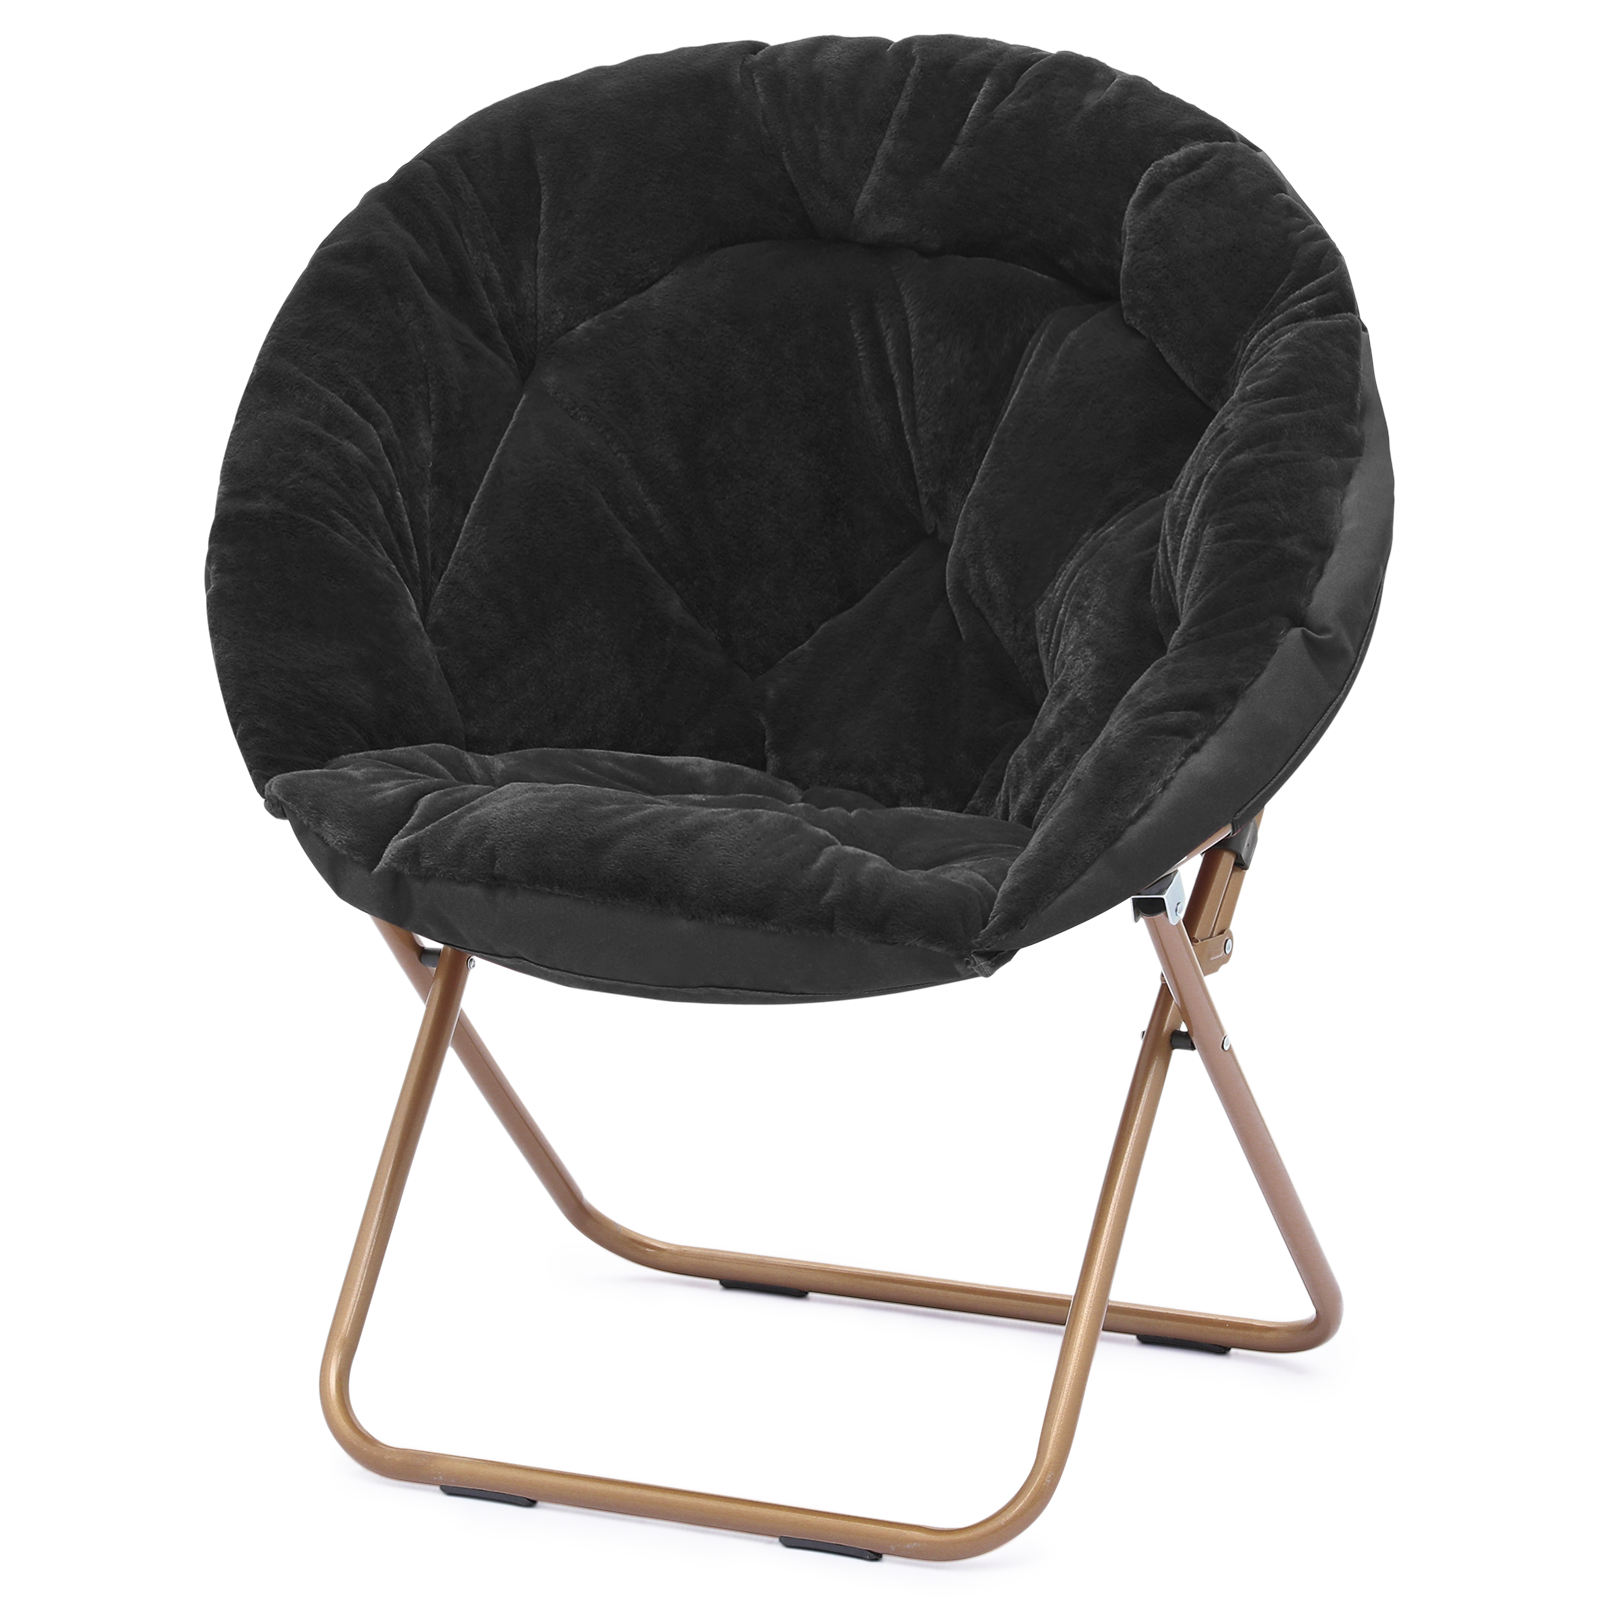 Magshion Saucer Chair Soft Faux Fur Folding Accent Chair, Lounge Lazy Chair Moon Chair Seat with Metal Frame for Bedroom Living Room, Black - image 1 of 10